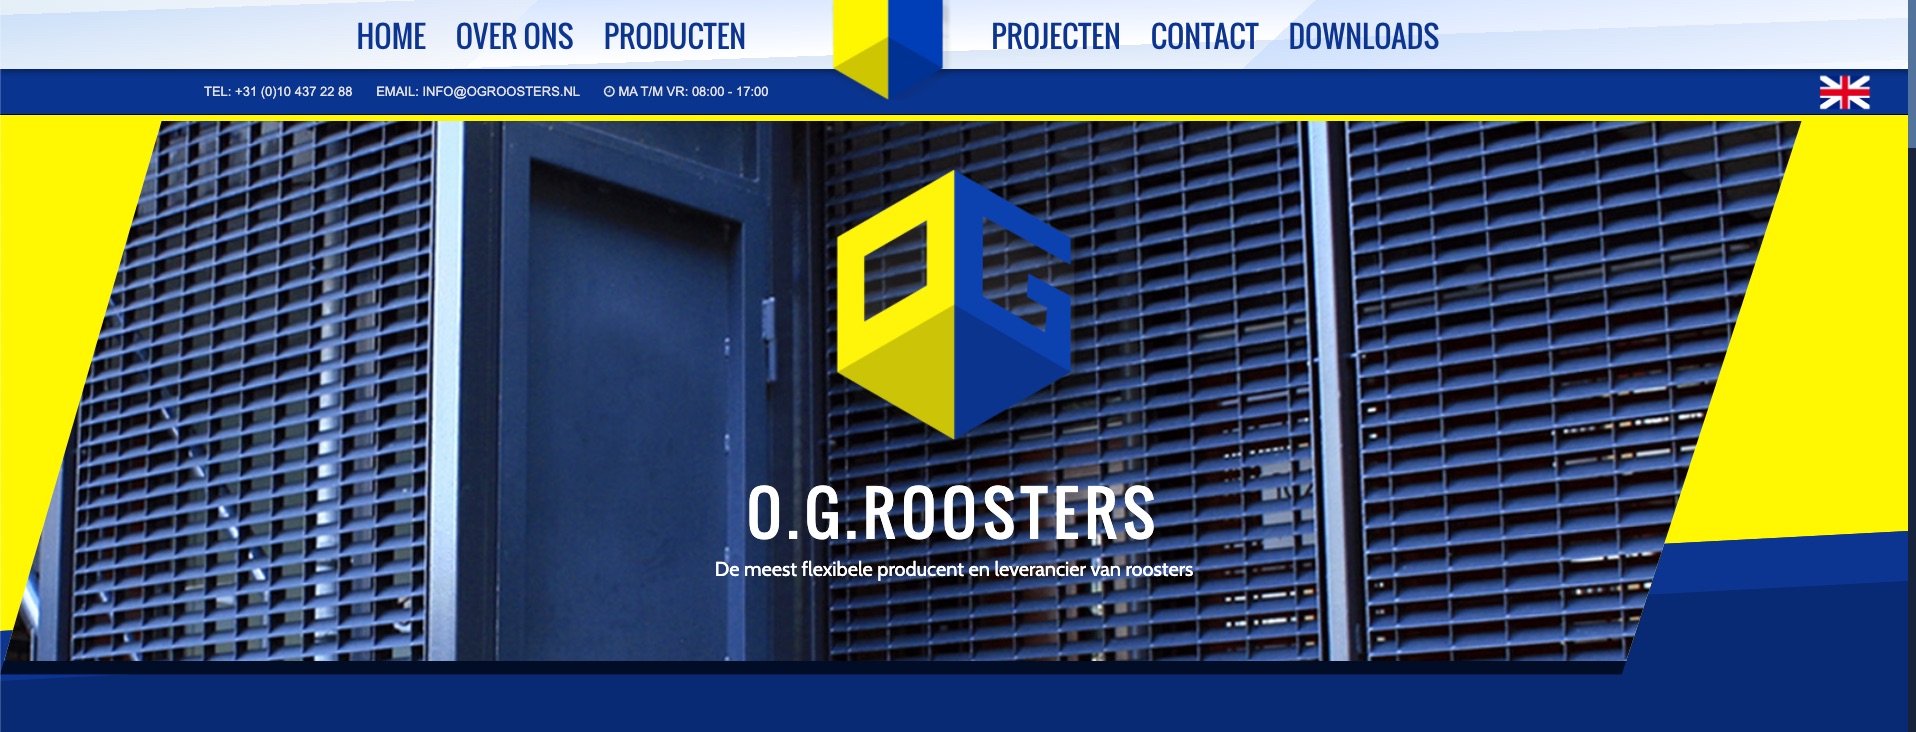 o.g. roosters